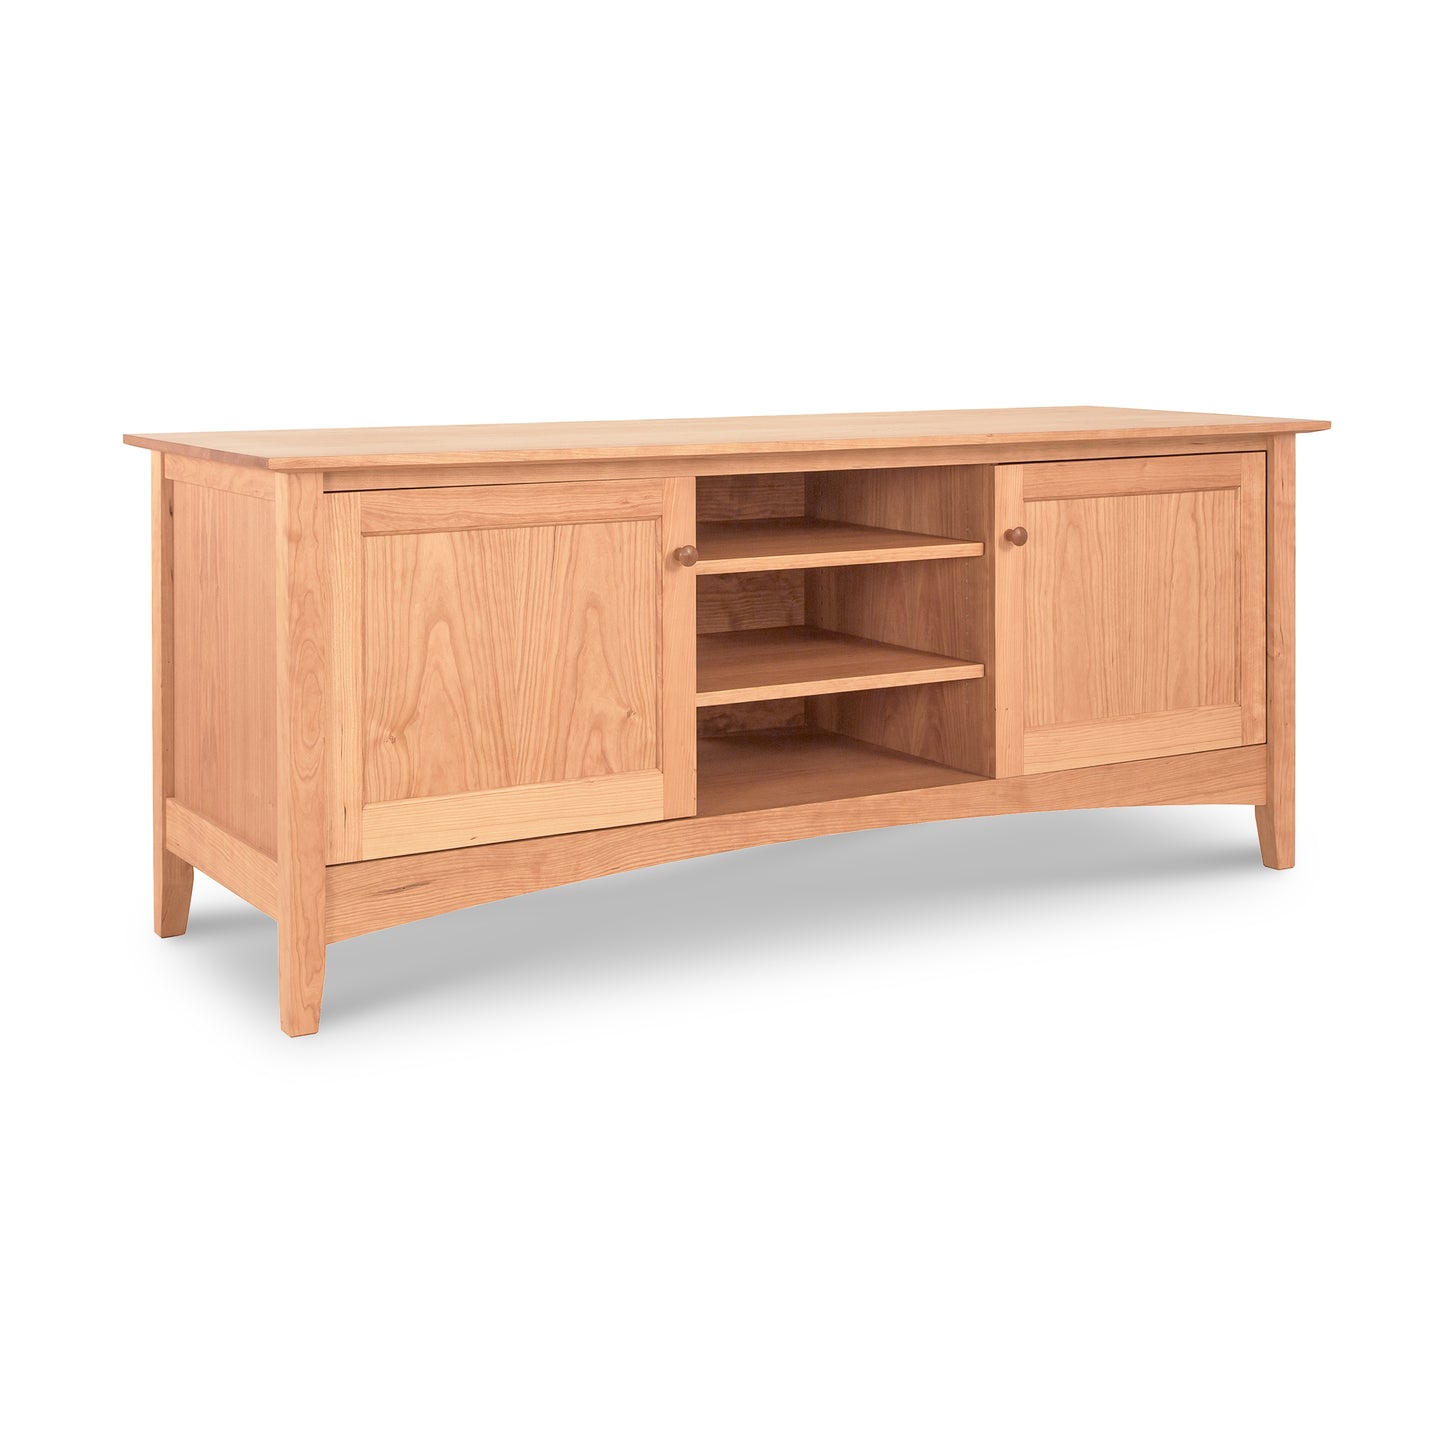 A Maple Corner Woodworks American Shaker 67" TV Stand with two cabinets and central shelving, made from solid hardwoods, isolated on a white background.